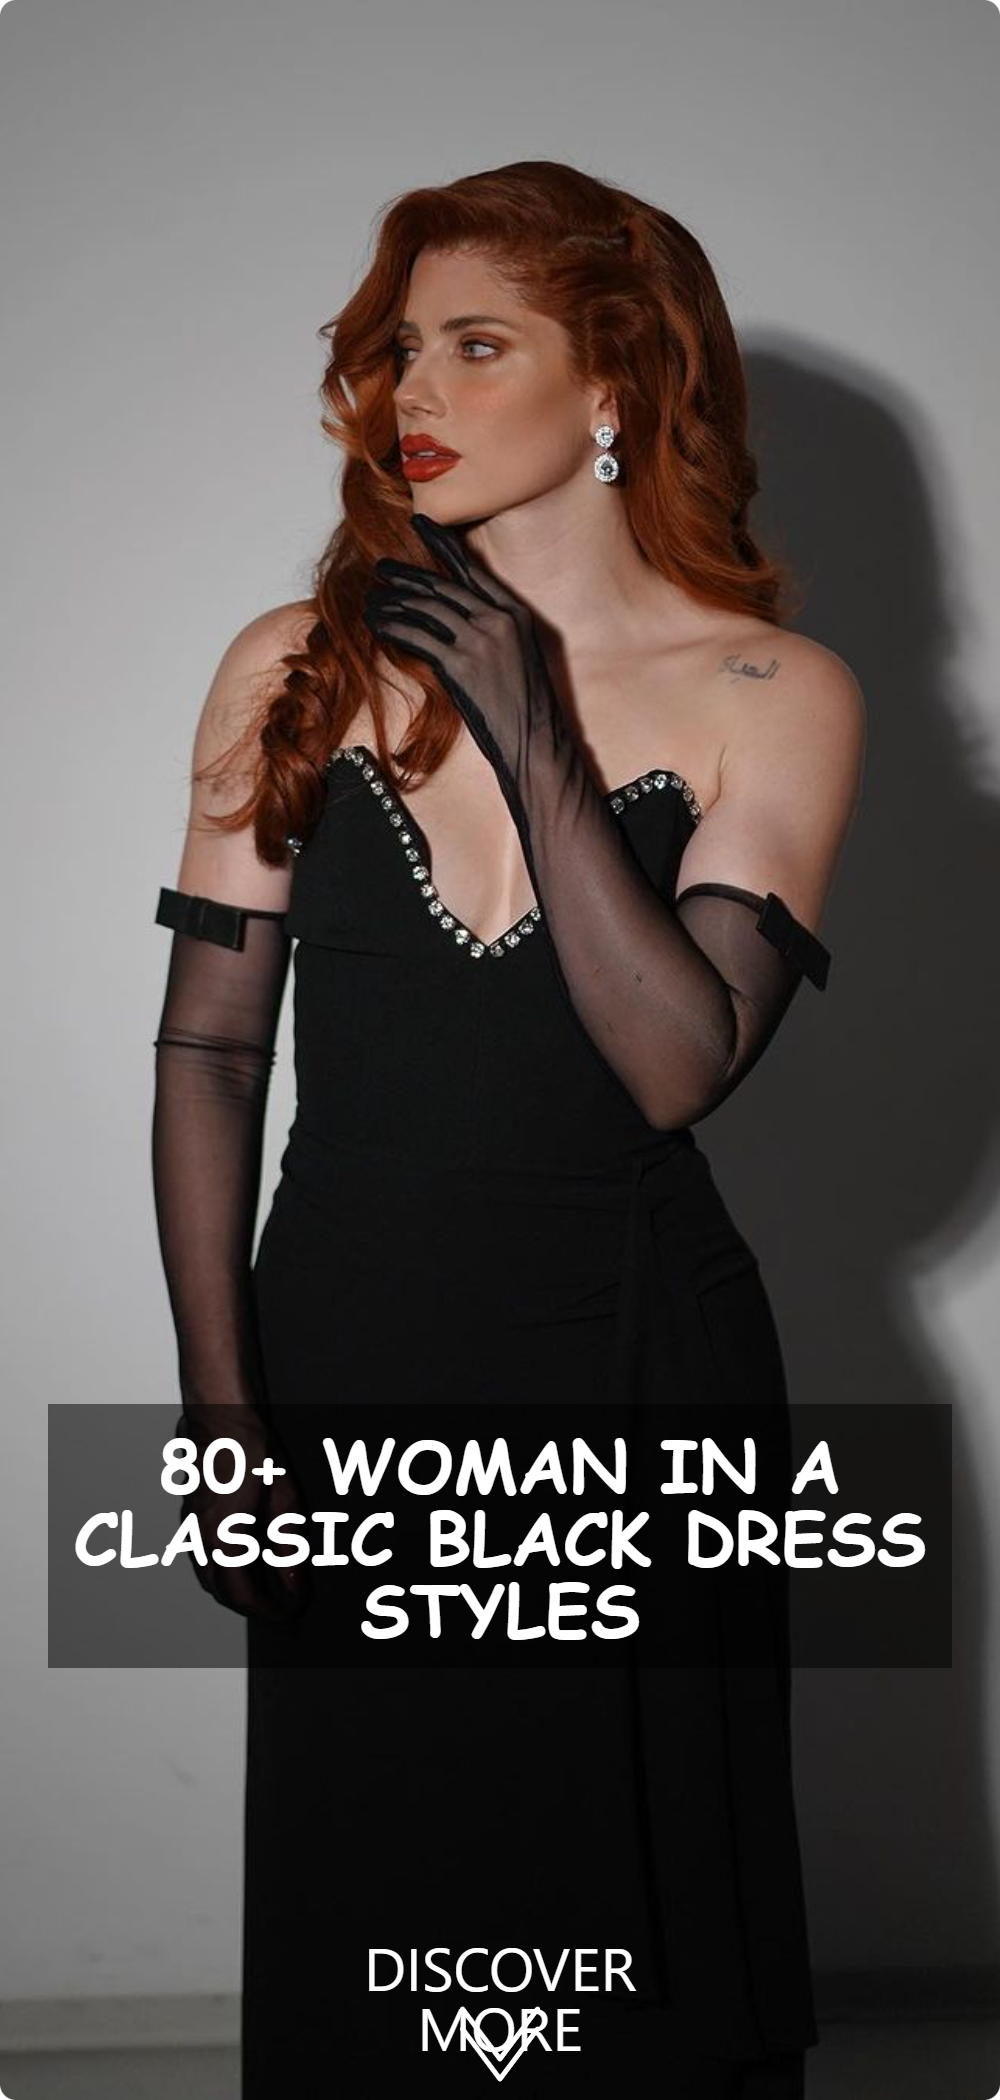 A woman in a classic black dress with unique shoulder straps standing in a pose that exudes confidence and sophistication.